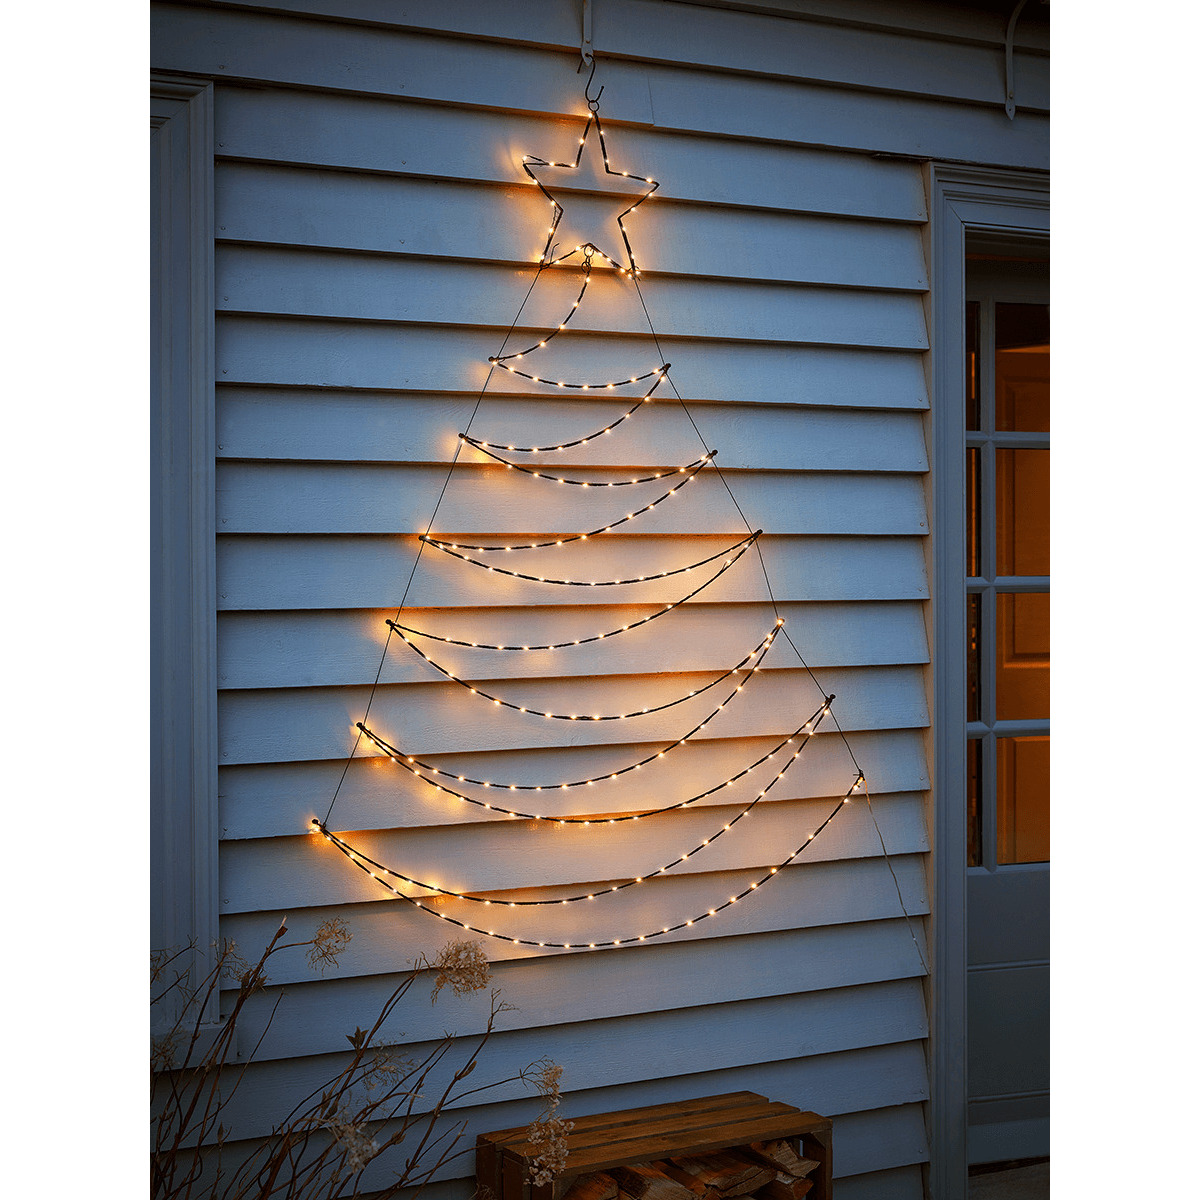 Indoor Outdoor Magical String Light Tree - image 1